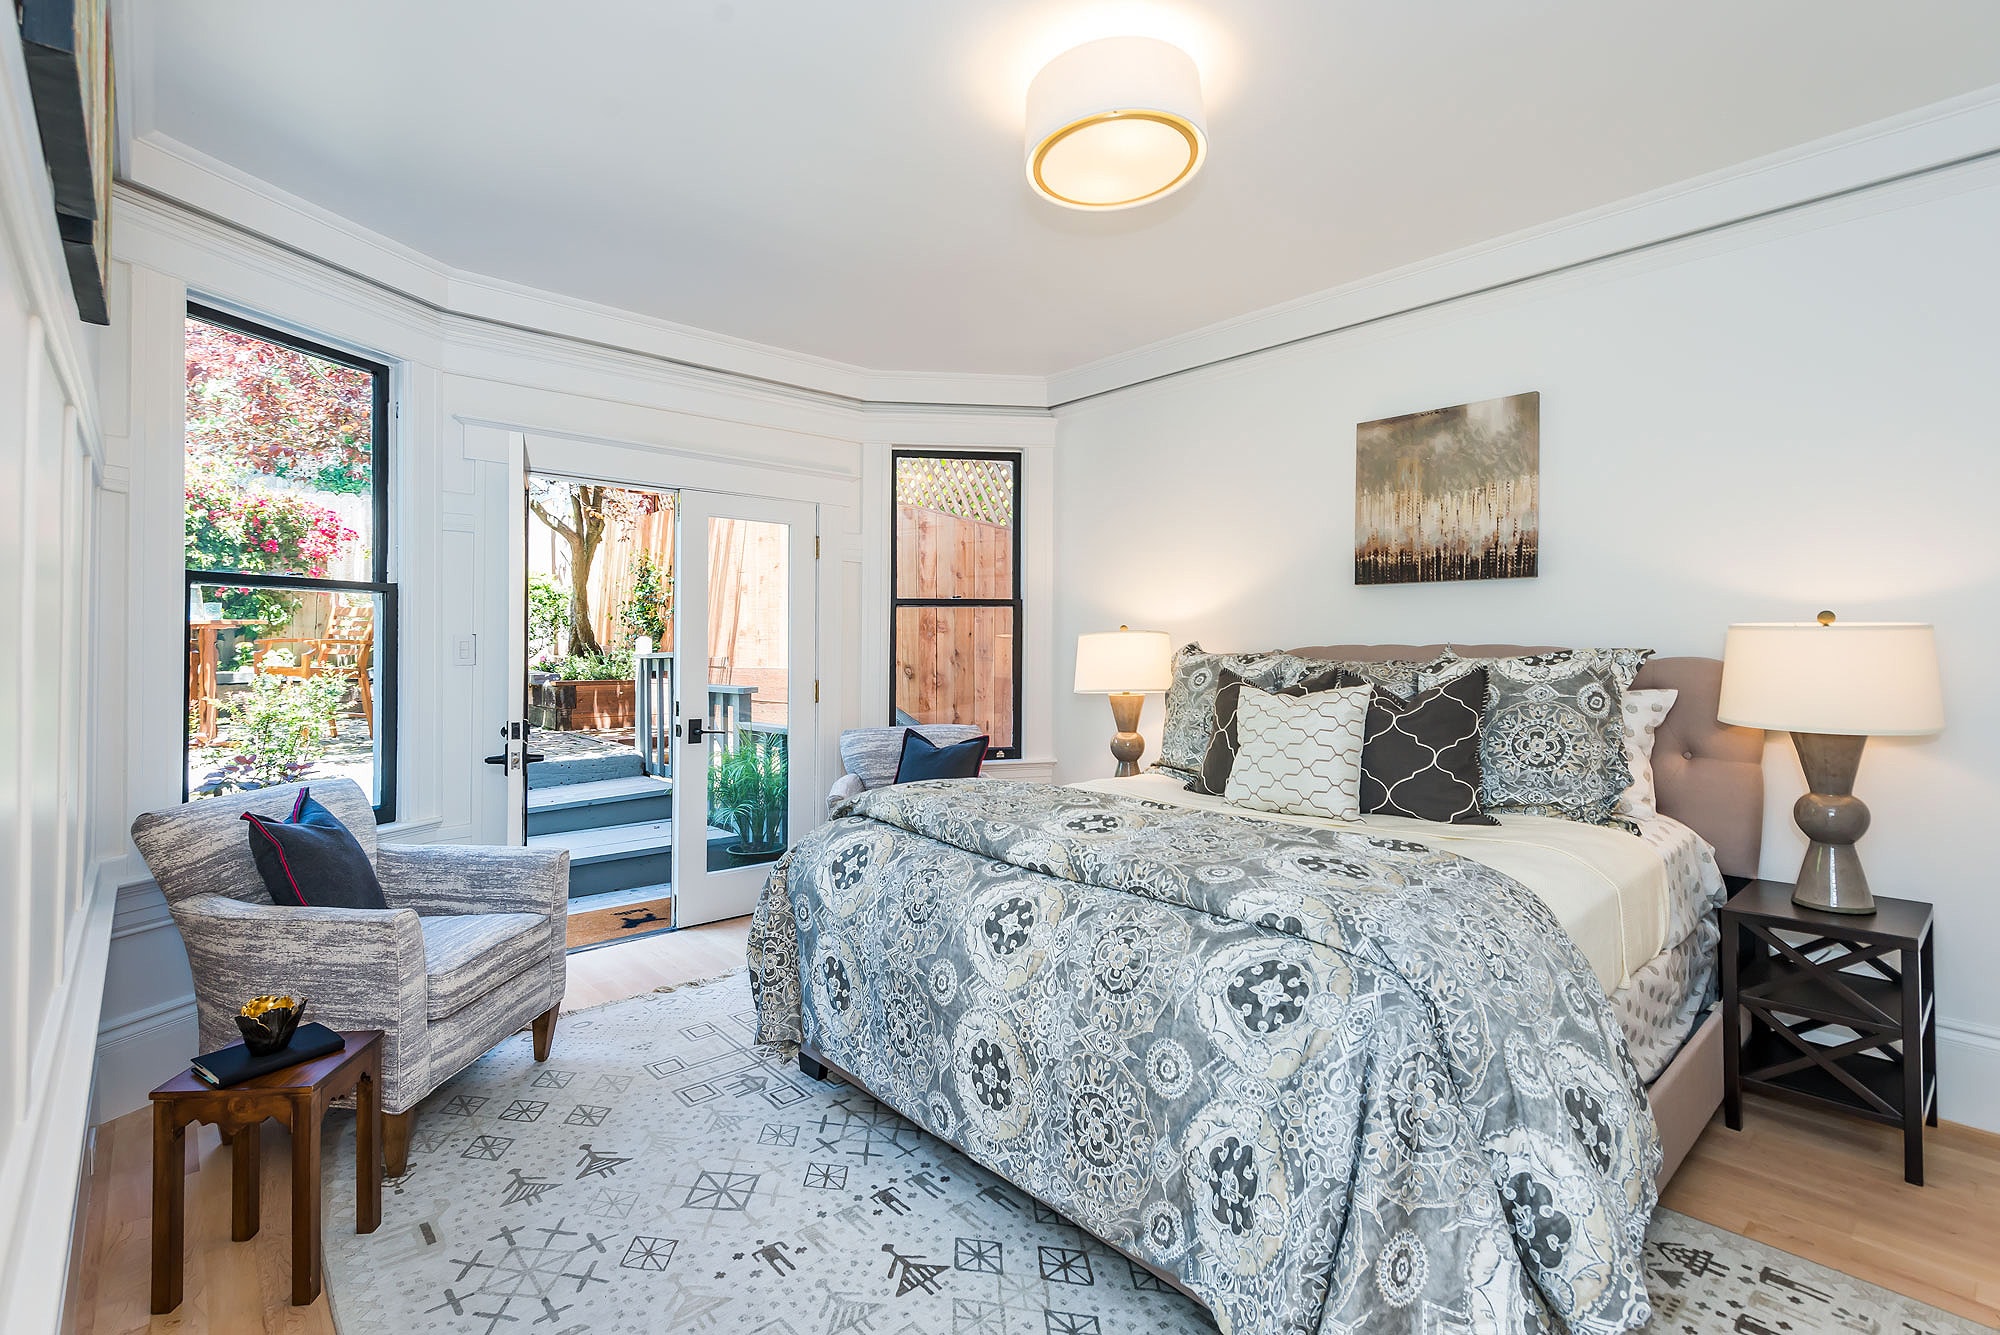 714 Page Street's master bedroom has direct garden access to landscaped garden area with brick patio, pomelo tree and serenity.